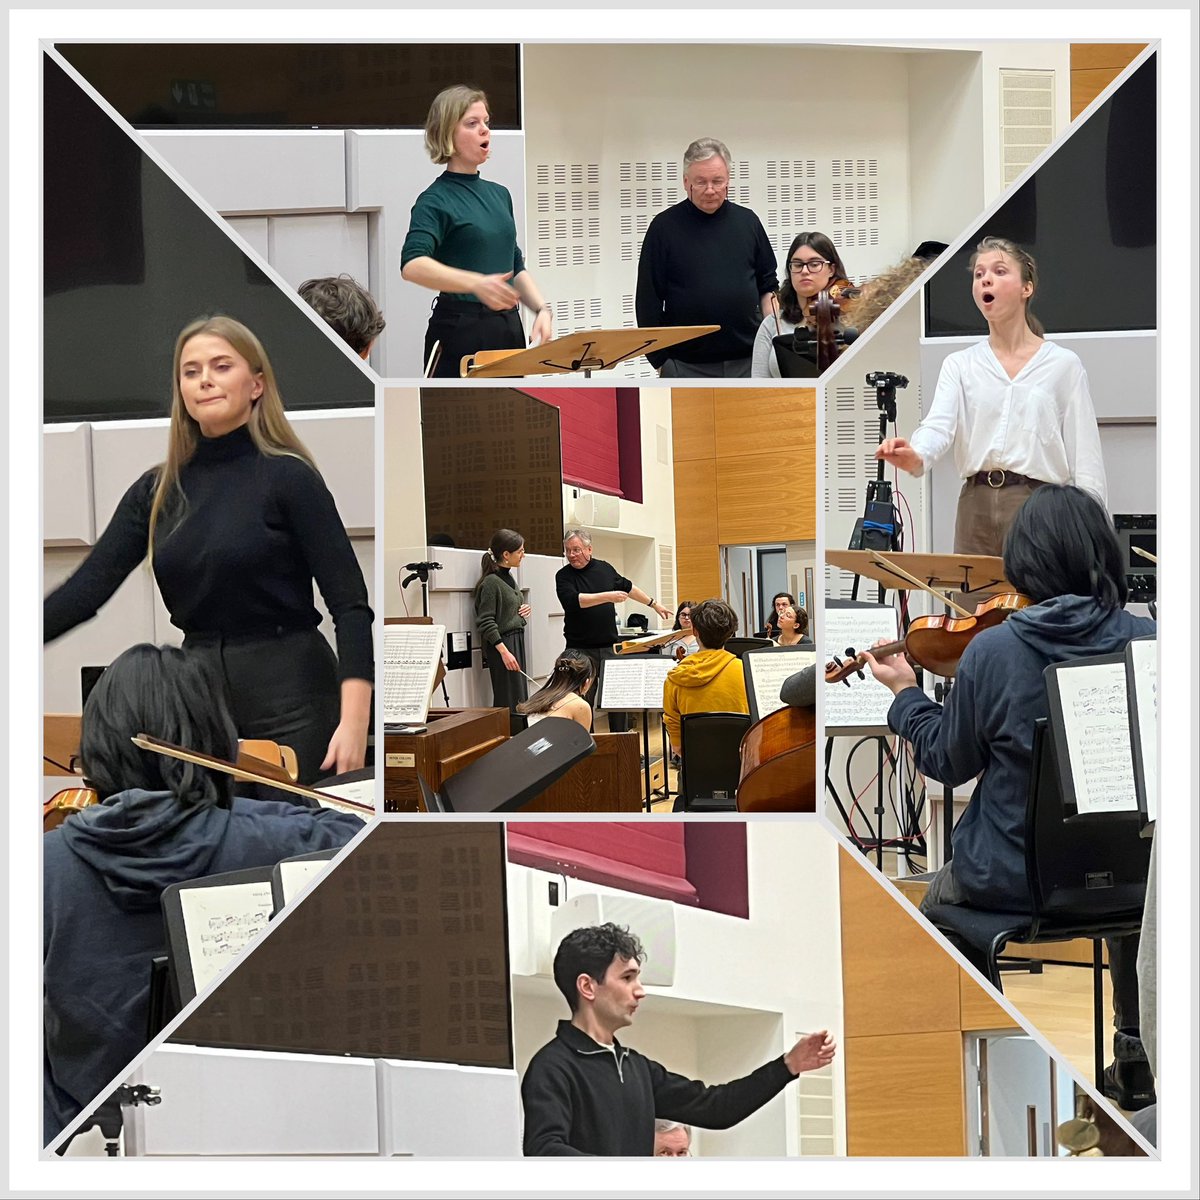 Well done to our 10 participants from 🇺🇸 🇹🇭 🇩🇰 🇺🇦 🇳🇱 🇩🇪 🇱🇻 🇫🇷 for their work this weekend. Here they are working on Mozart’s Great Mass in C minor with @rncmlive chamber choir and orchestra, @davidhconductor @sjoverington #masterclass